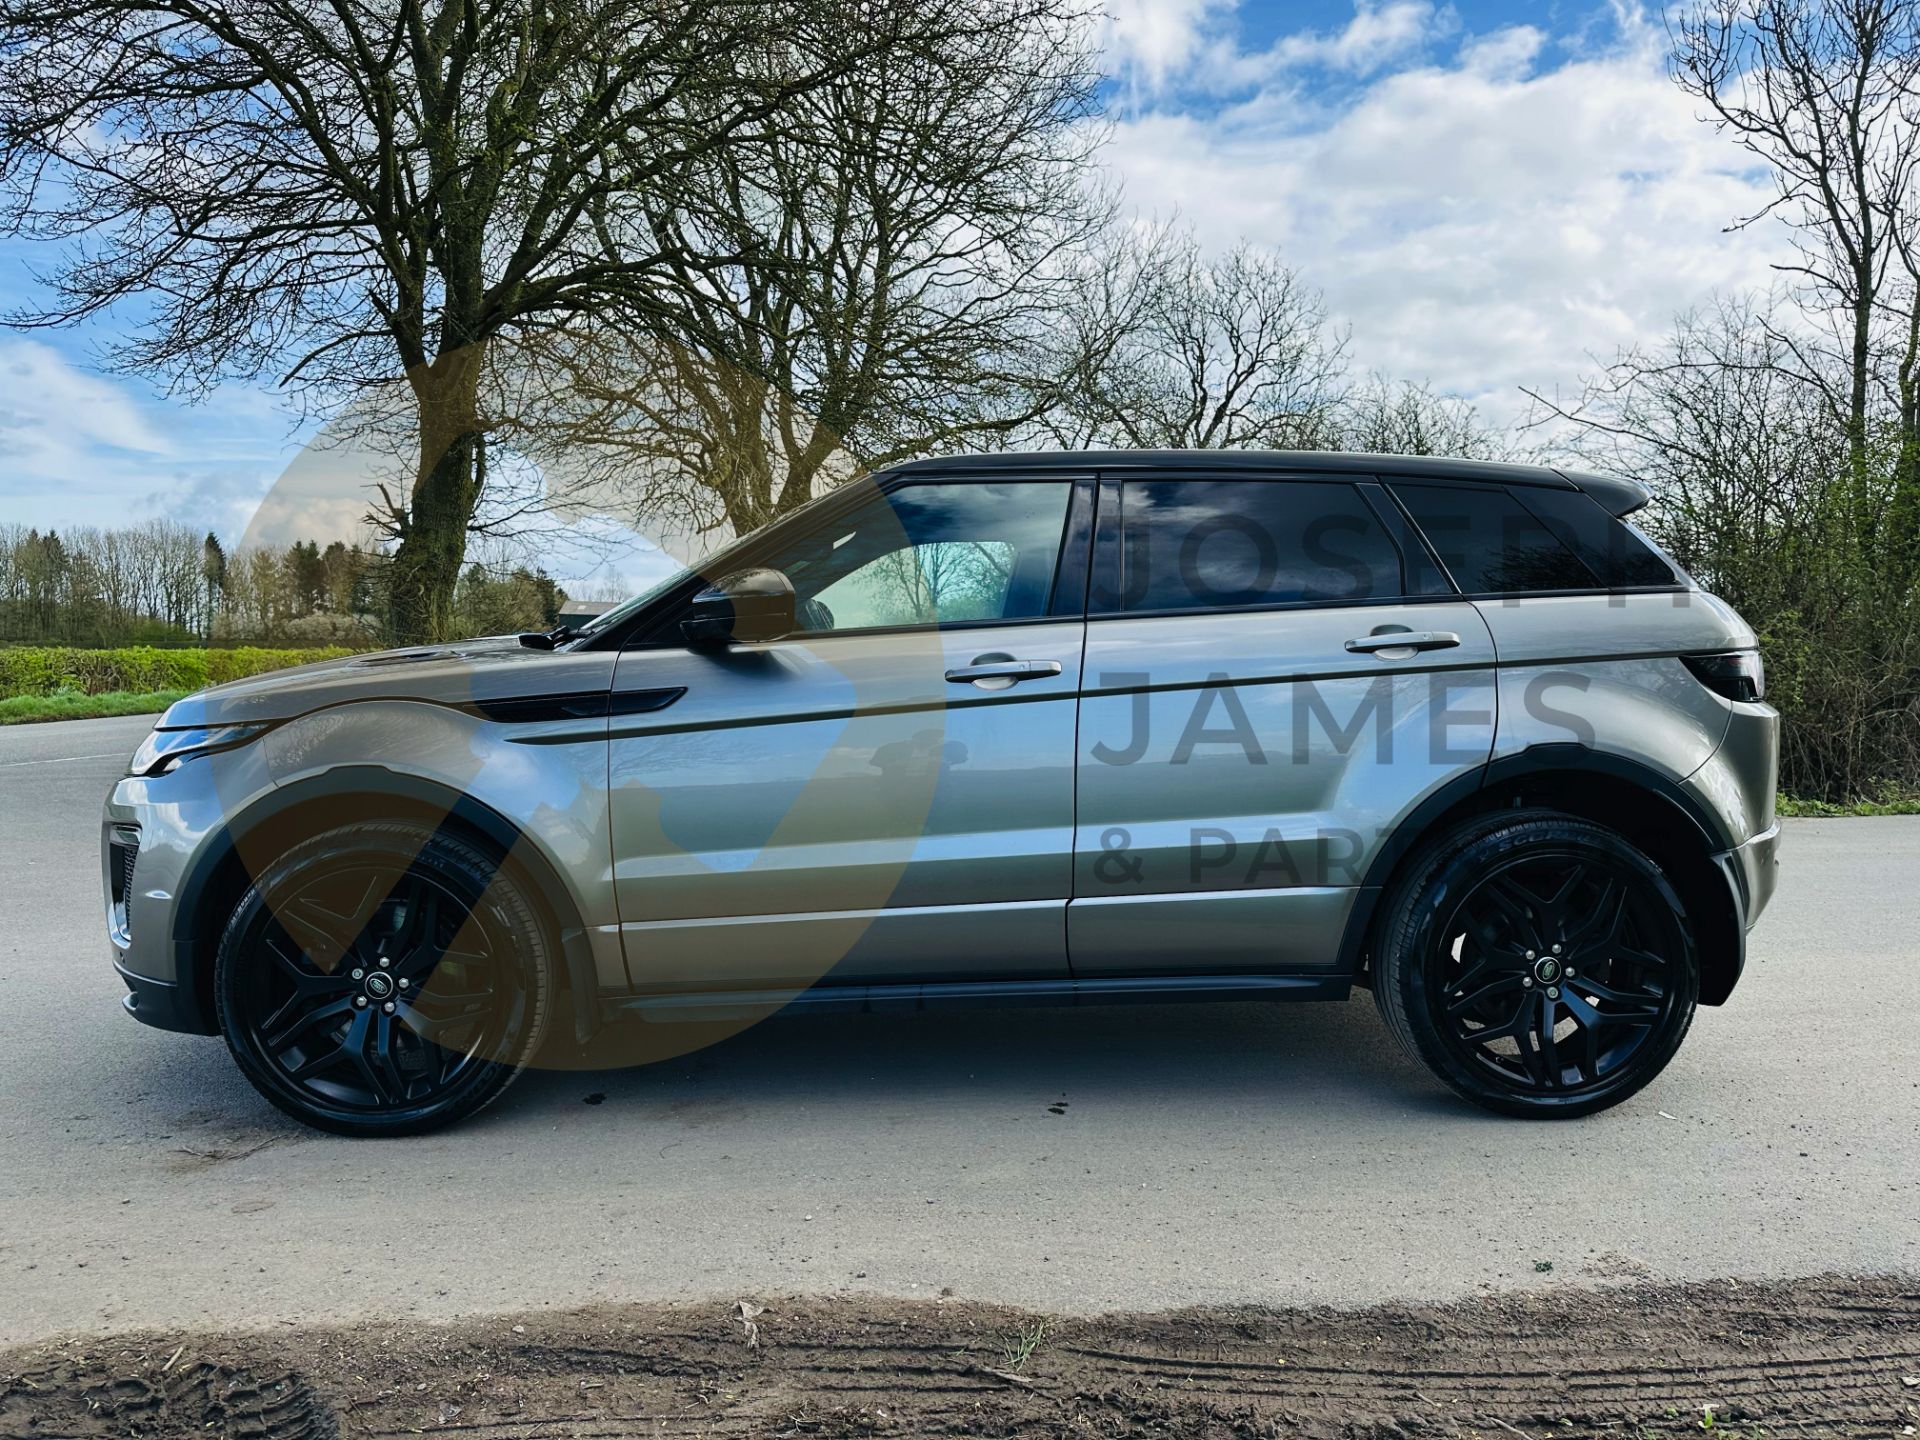 (On Sale) RANGE ROVER EVOQUE *HSE DYNAMIC* SUV (2018 - EURO 6) 2.0 SD4 - AUTOMATIC *ULTIMATE SPEC* - Image 7 of 48